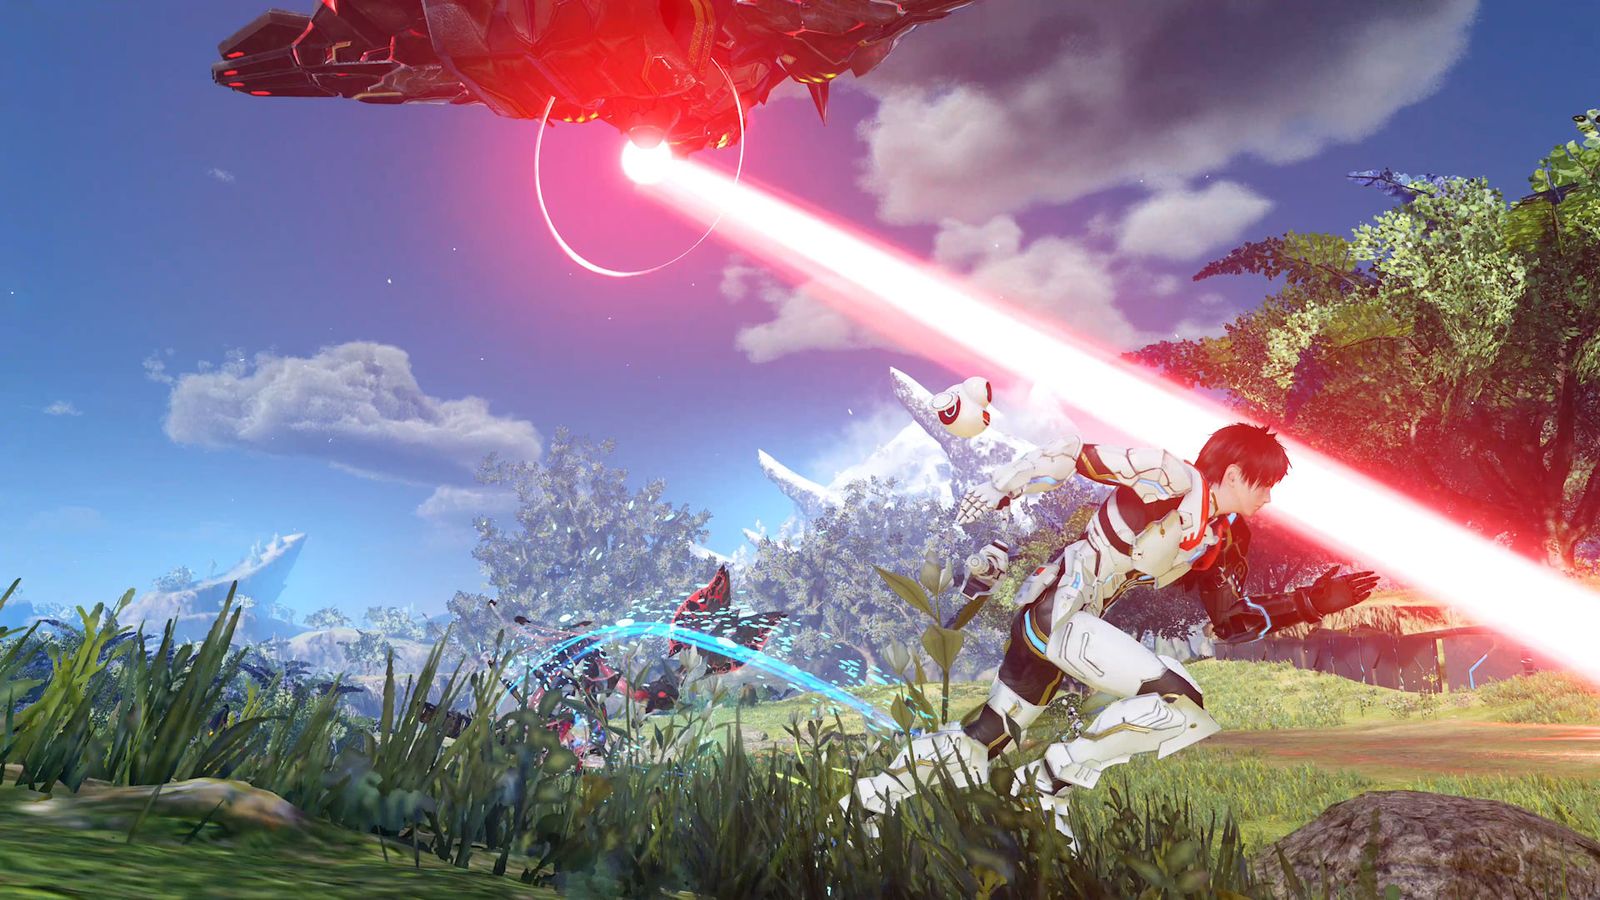 In-game image from Phantasy Star Online 2 New Genesis of a character in white armour running from a red laser being shot from a ship in the sky.